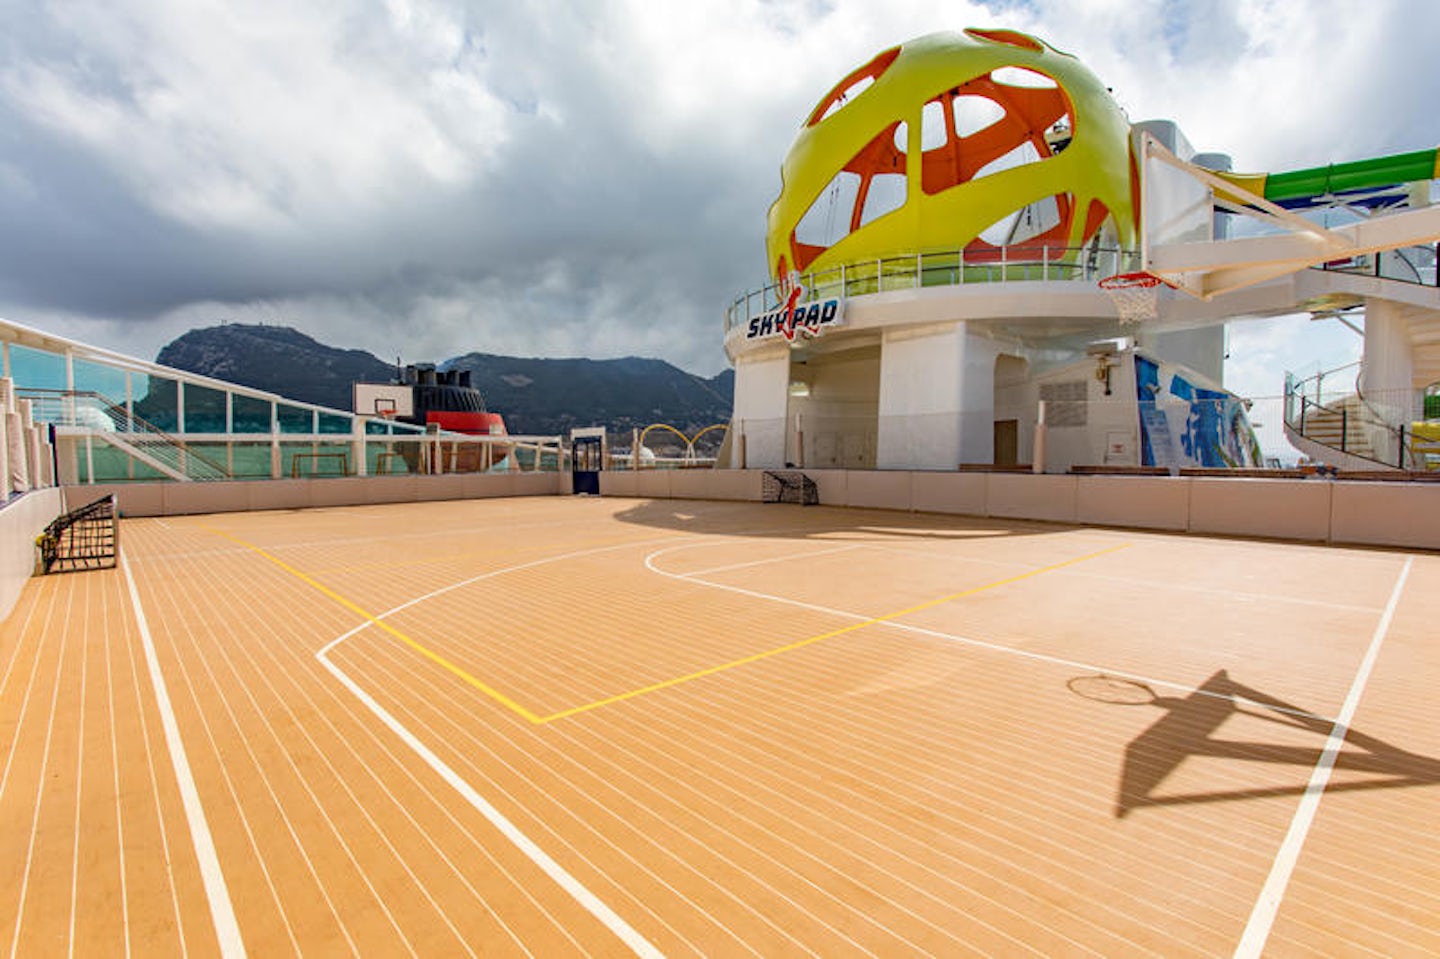 Sports Court on Independence of the Seas